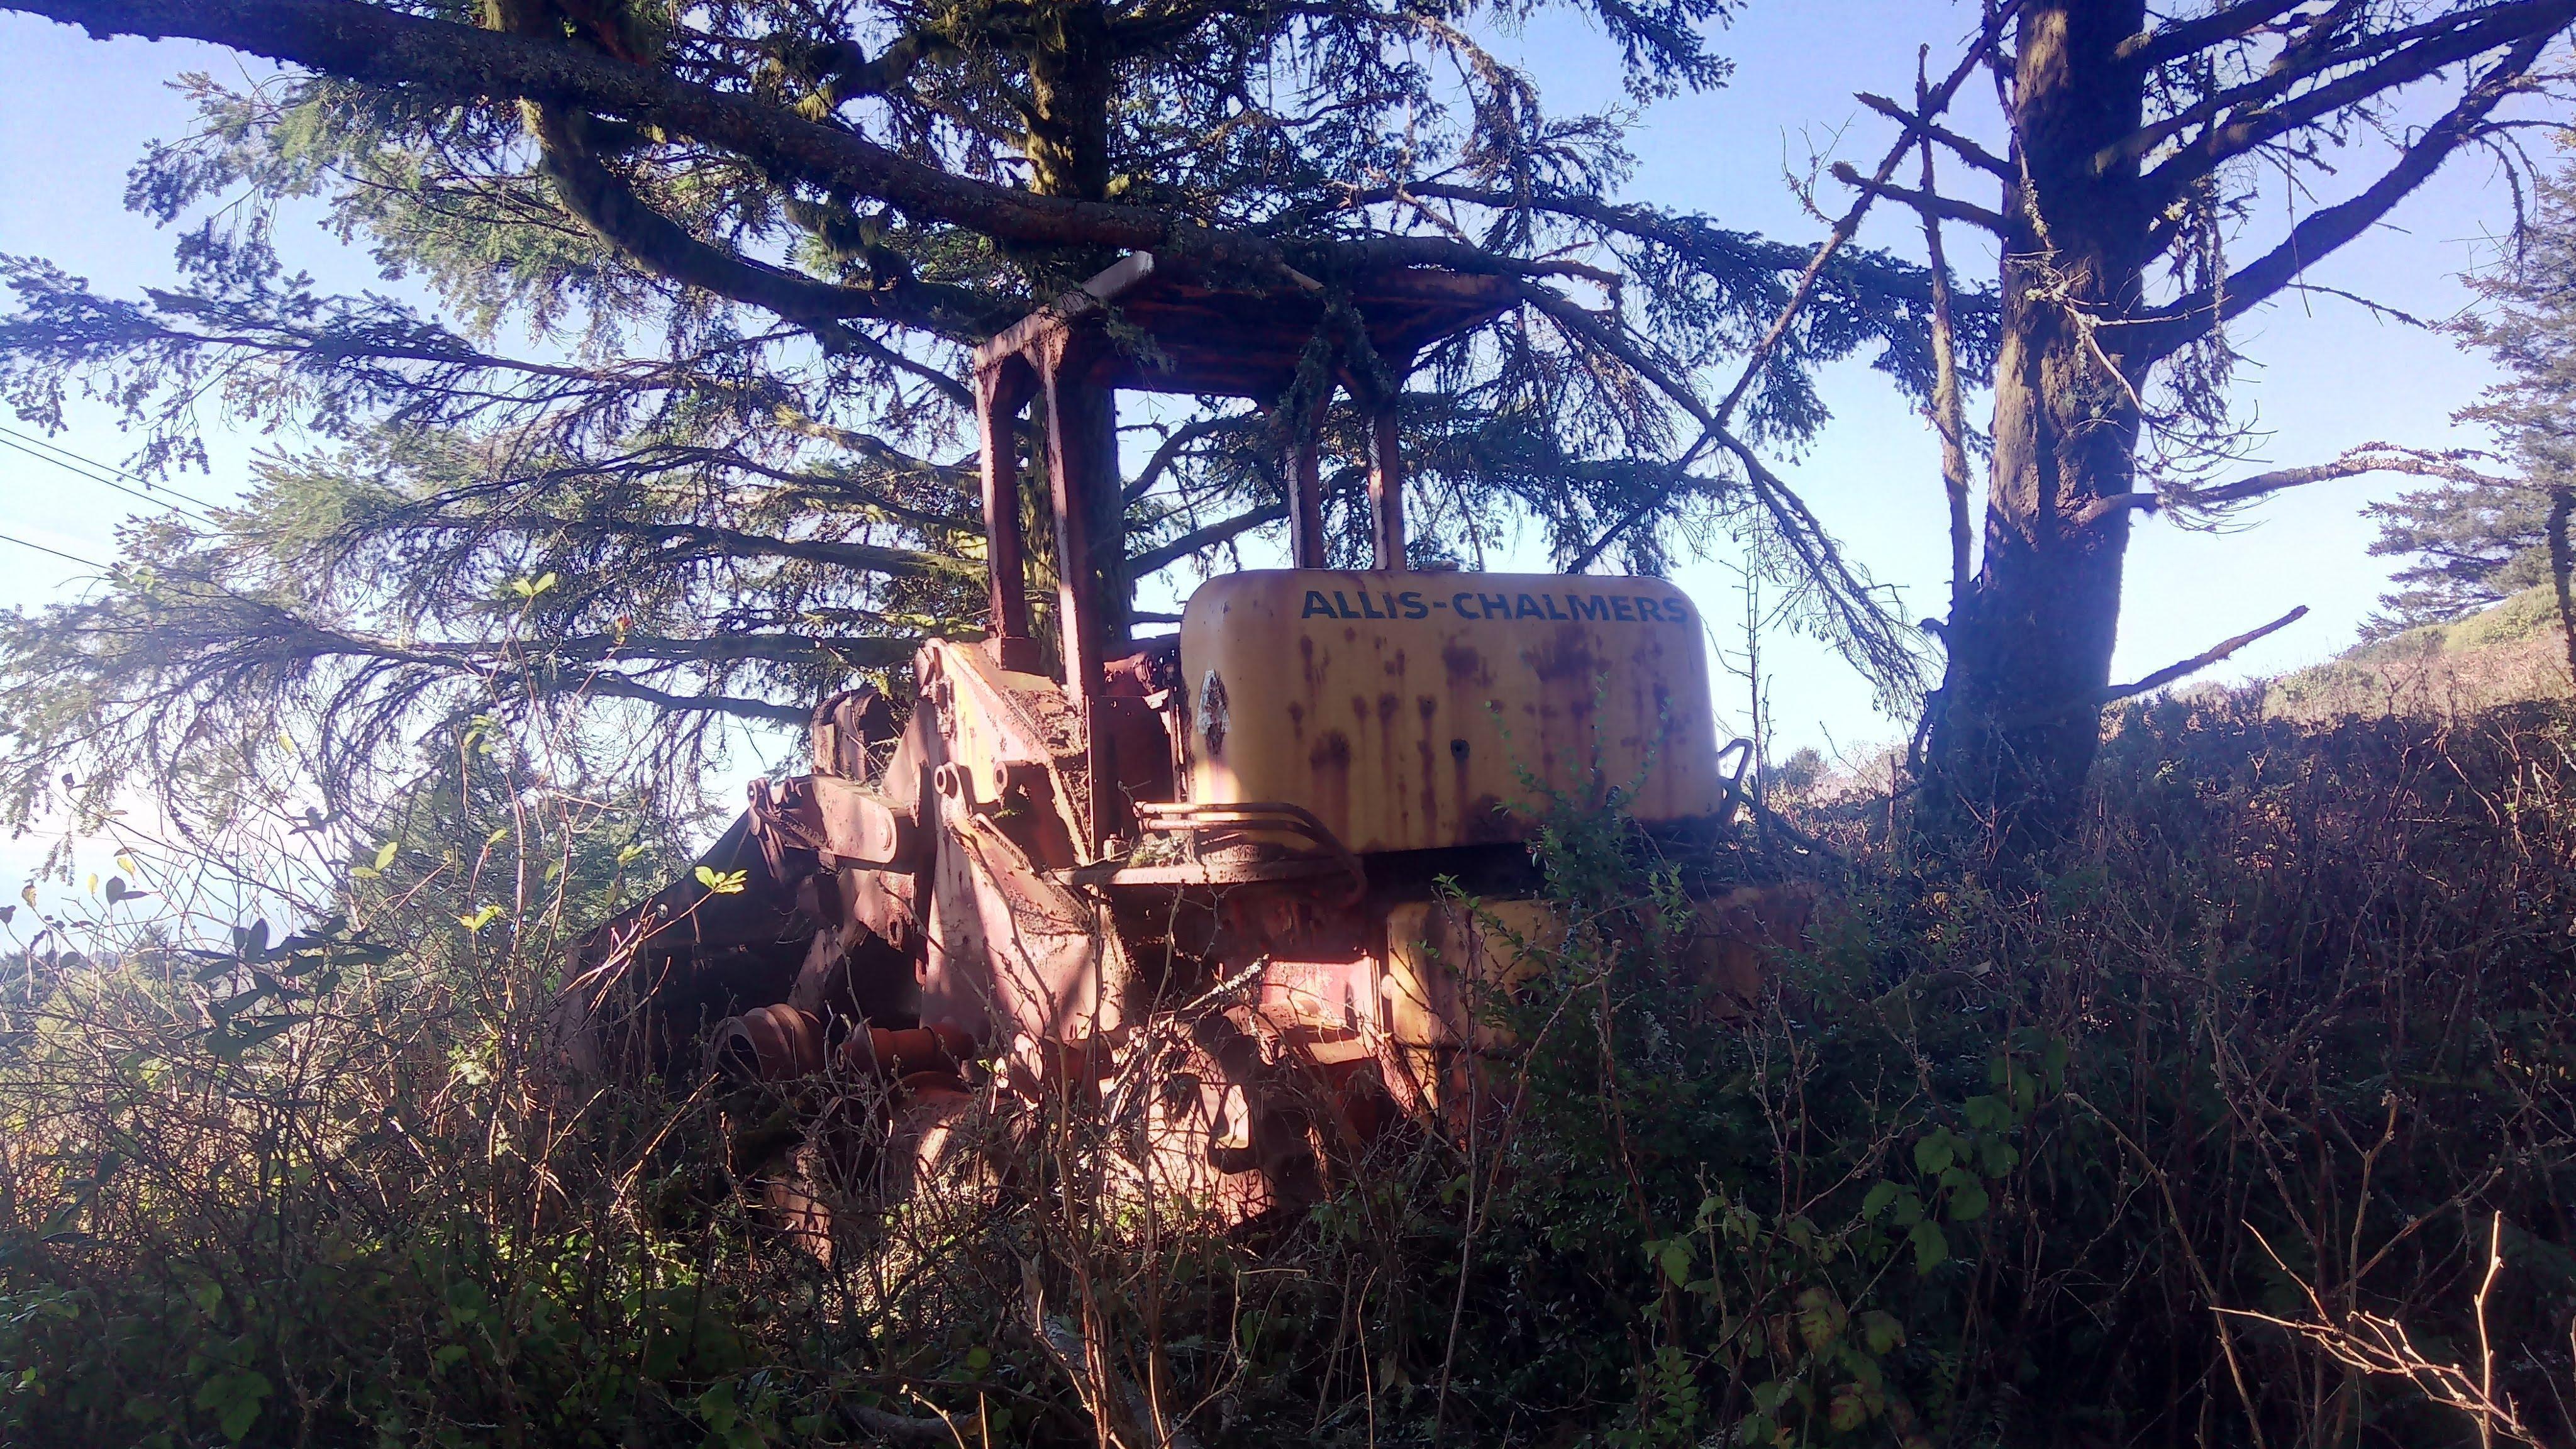 An abandoned tractor